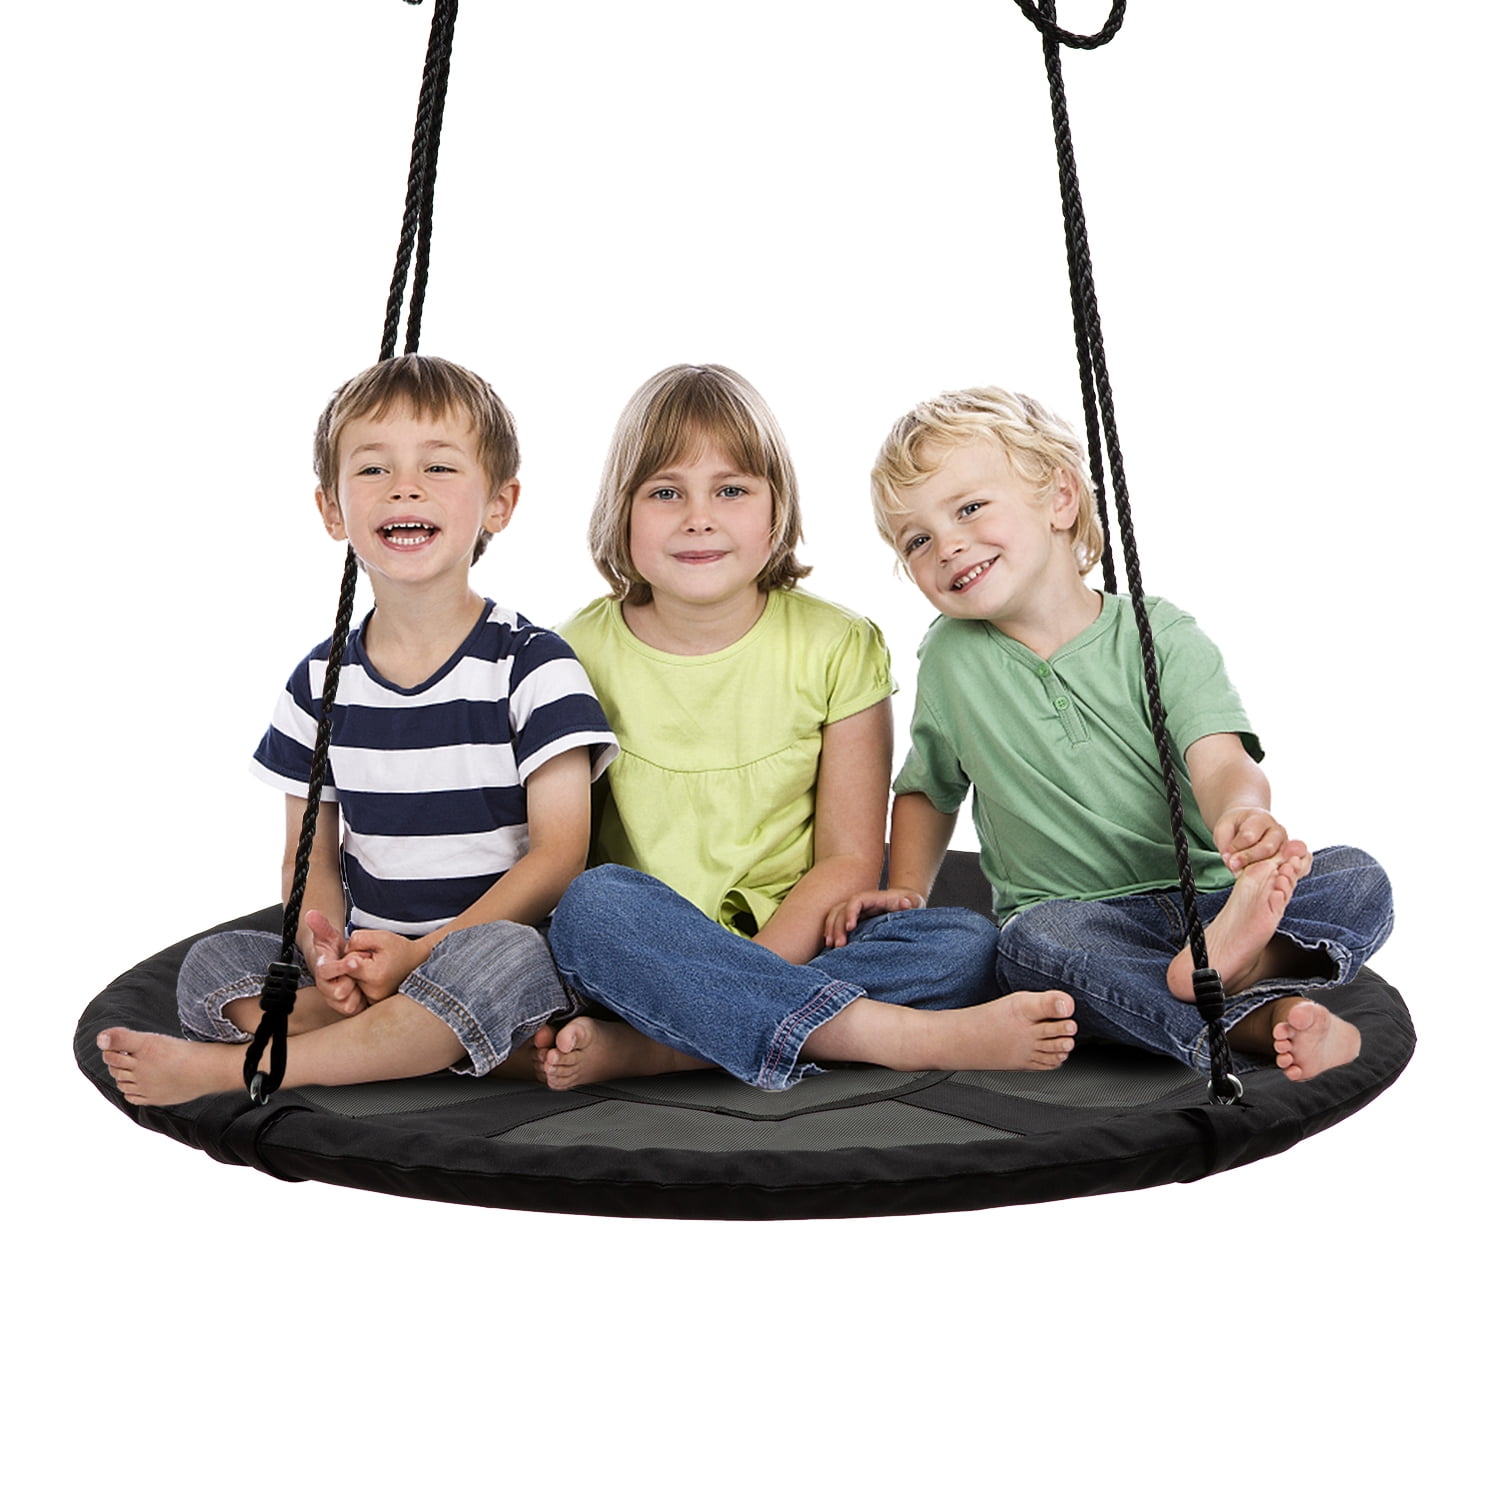 Details about   Swing Seat for Kids Adjustable Rope Hand-Knitting Round Children Swing Chair... 